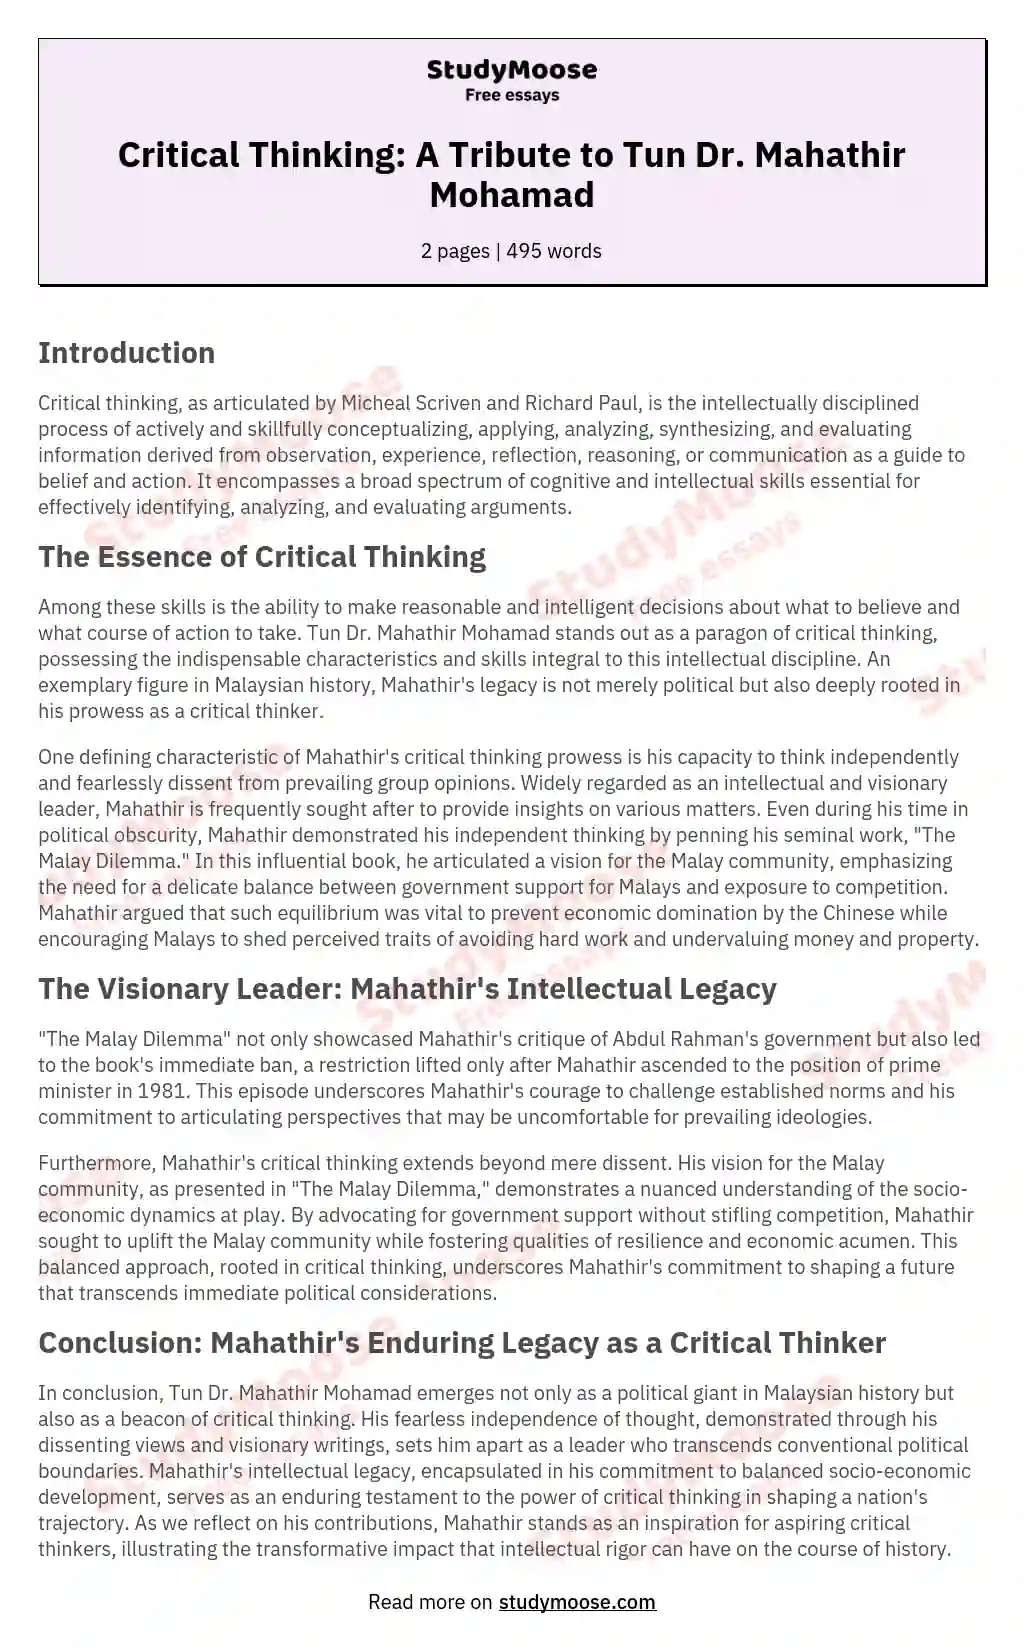 who is critical thinking essay